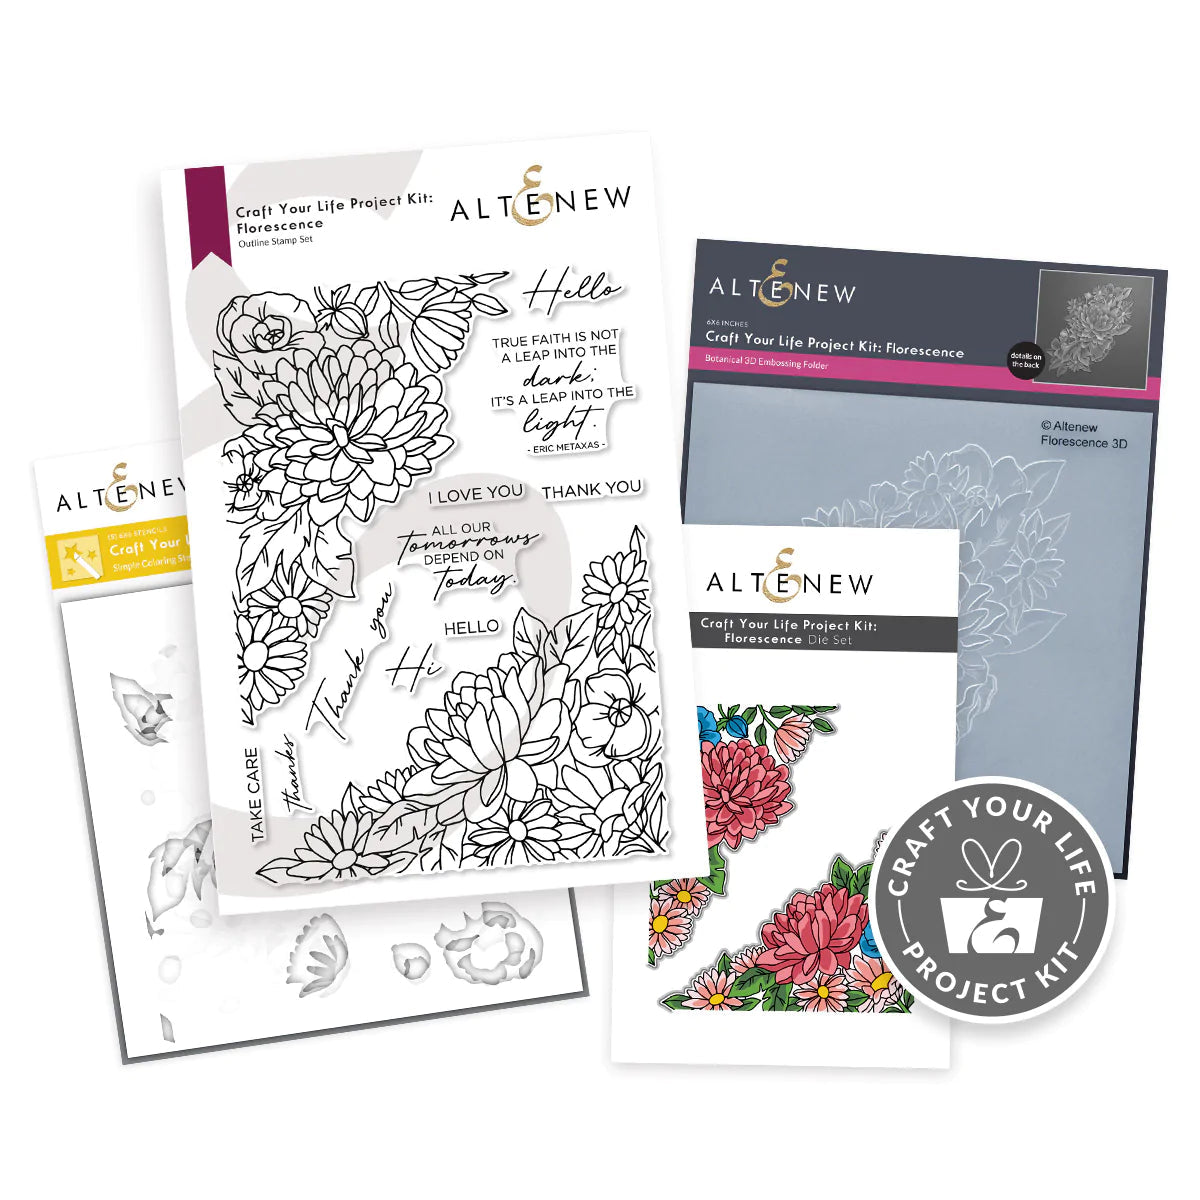 Altenew Craft Your Life Project Kit Florescence